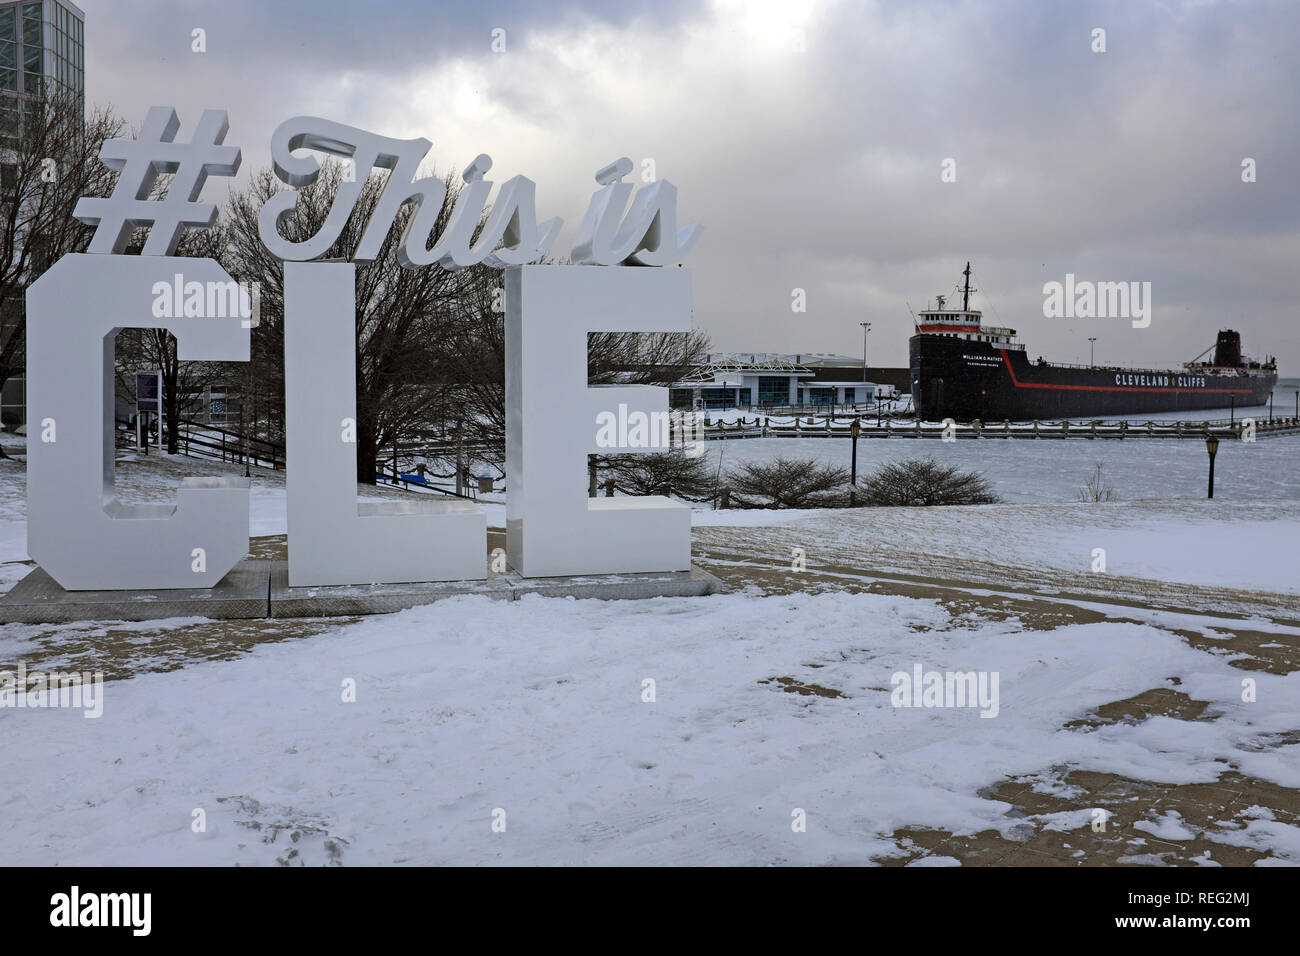 Cleveland, Ohio, USA, 21st January, 2019.  Remnants of winter storm Harper fill the snow-covered Northcoast Harbor on the shores of Lake Erie in Cleveland, Ohio, USA.  The cold weather following the snowstorm contributes to the lakefront being void of people as the record-breaking low temperatures are keeping people indoors.  Credit: Mark Kanning/Alamy Live News. Stock Photo